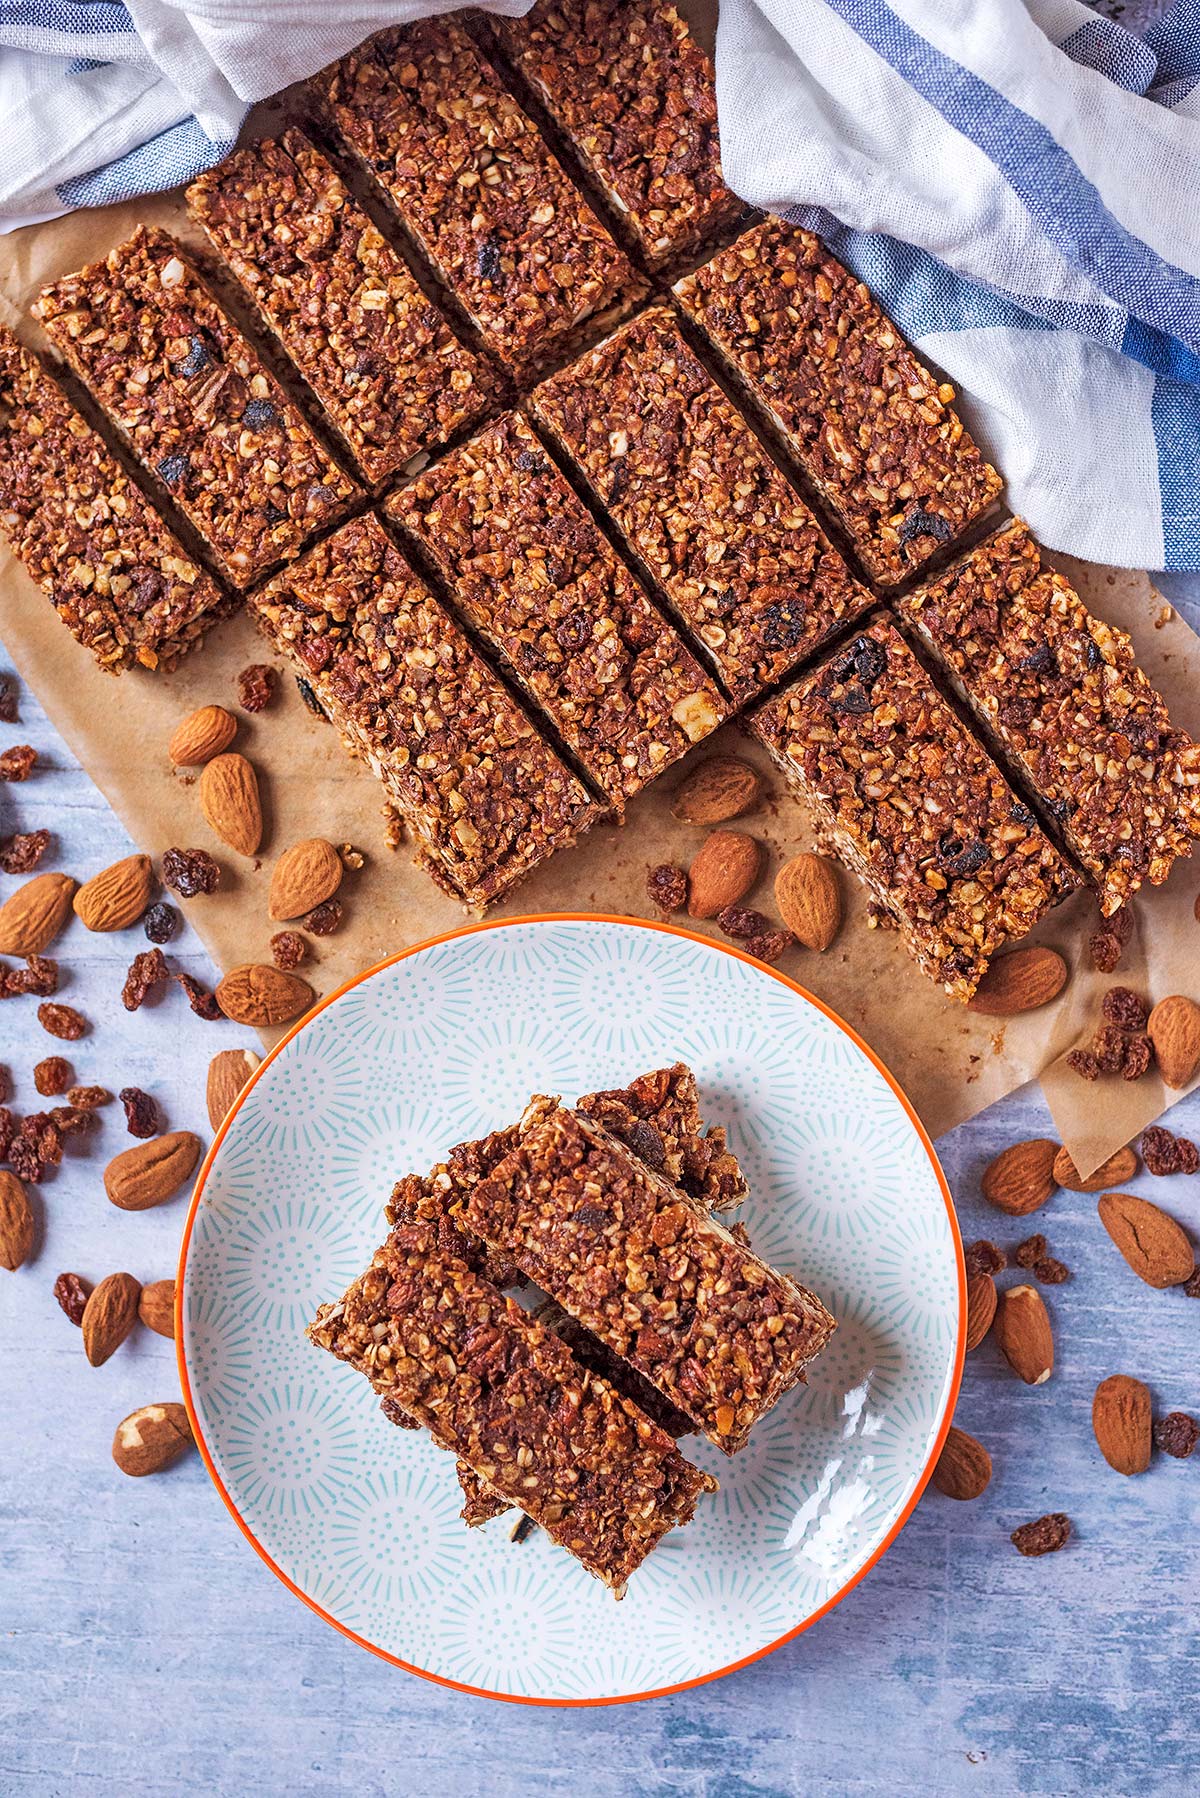 Rows of granola bars next to a plate with more bars on it,